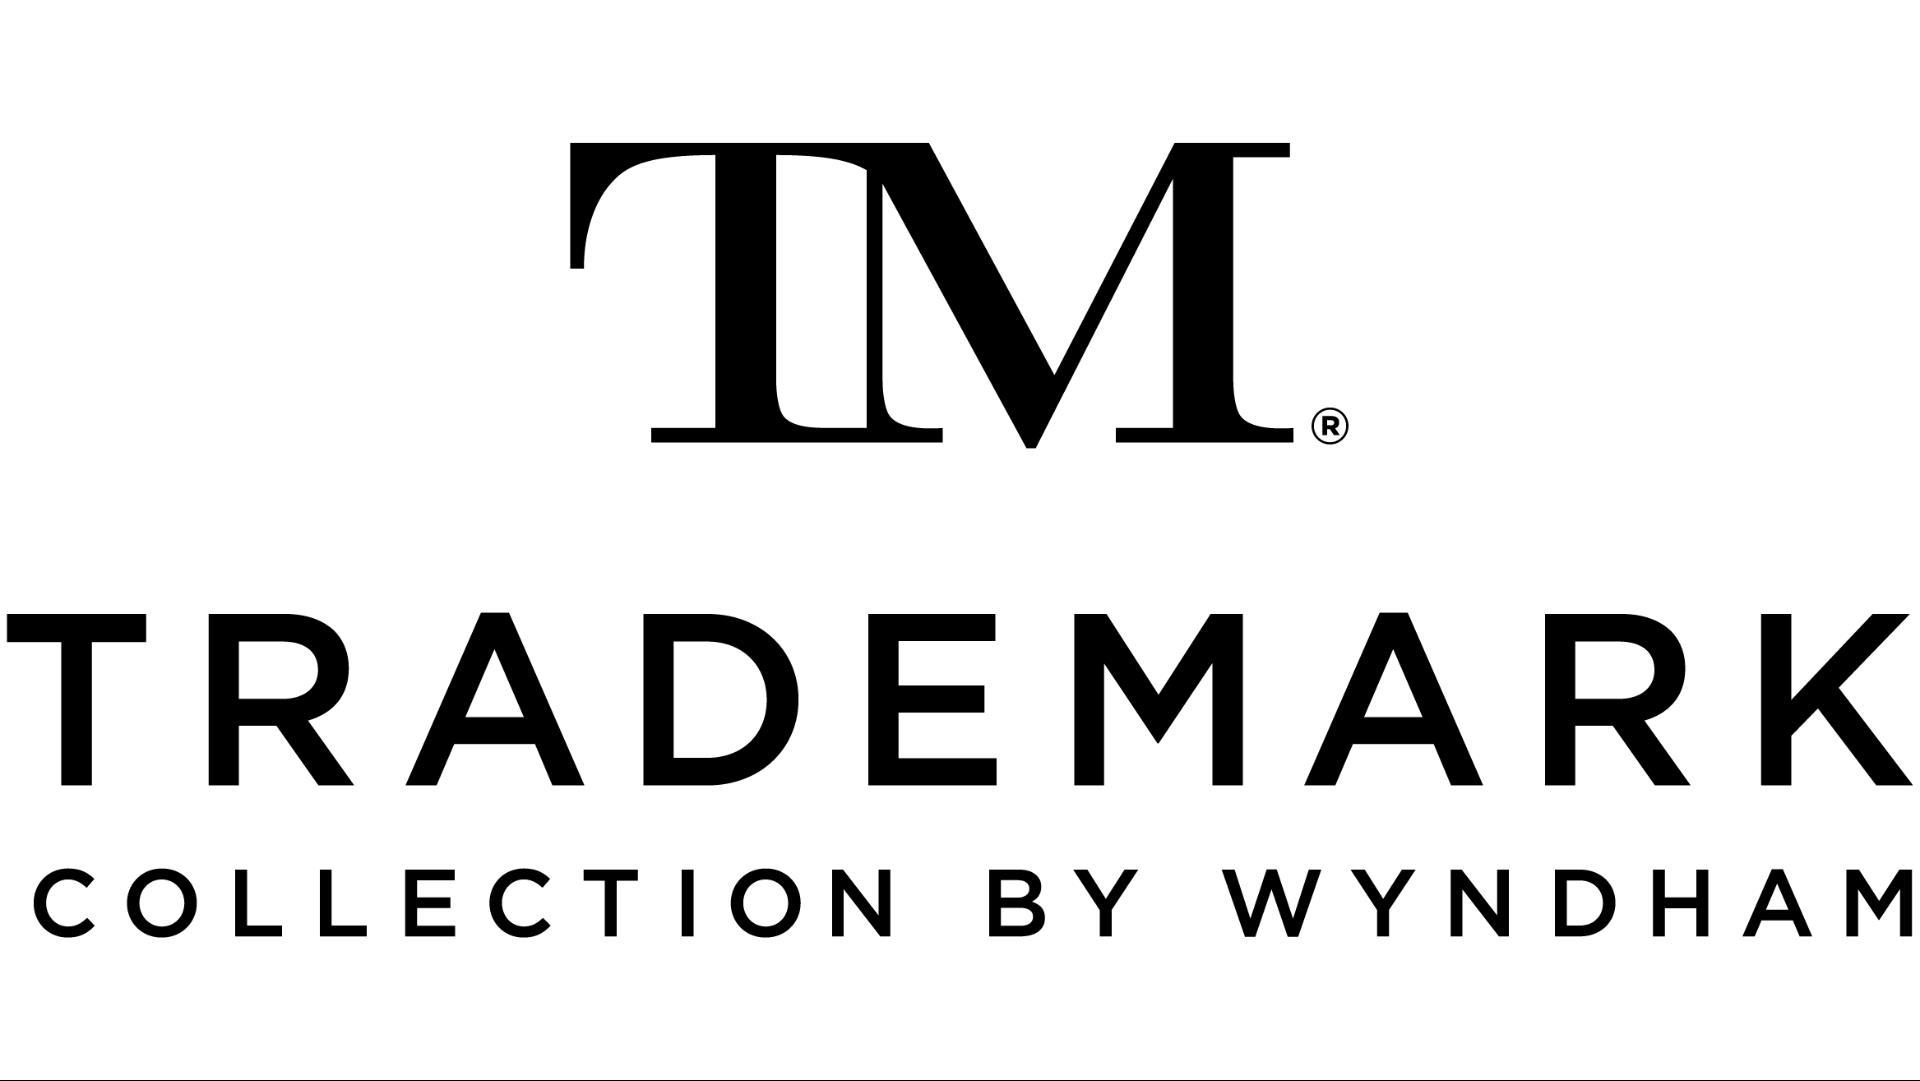 41 Lakefront Hotel, Trademark Collection By Wyndham in Geneva, NY